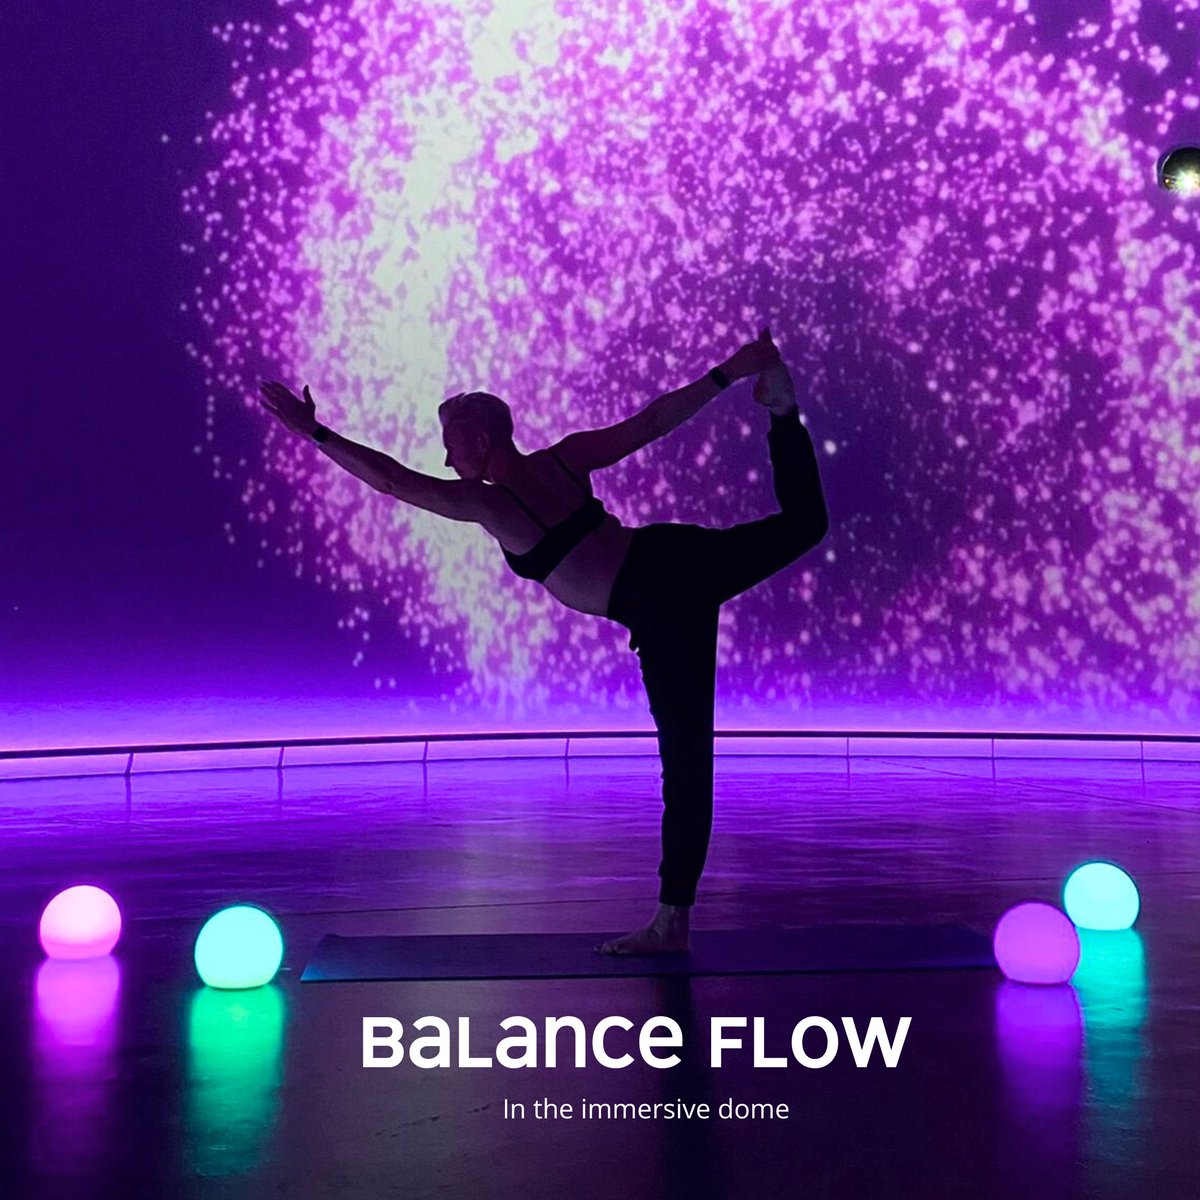 The rumours are true! Balance Flow Yoga is coming to our Immersive Dome.
This captivating class welcomes both beginners and seasoned practitioners of Yoga or Pilates, so everyone can join in on the magic! 🌈 

#Yoga #ImmersiveTechnology #WhatsOnPlymouth